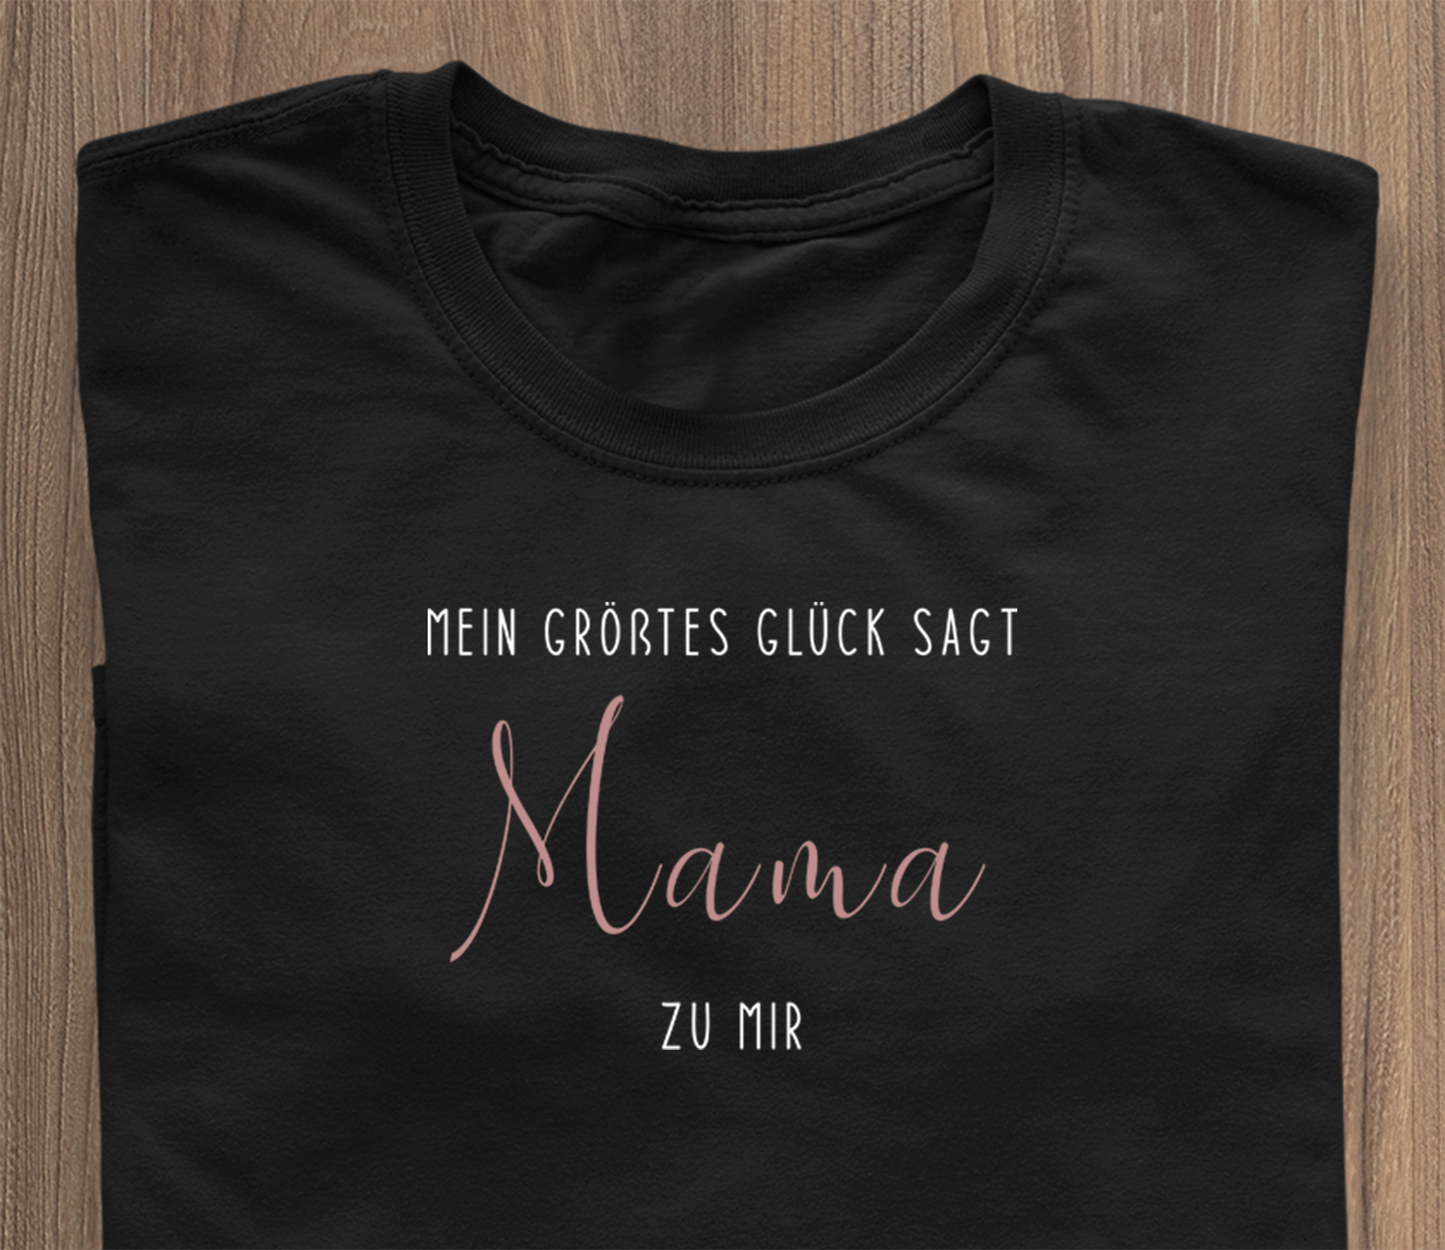 My greatest happiness says MAMA to me (new edition) - T-Shirt black